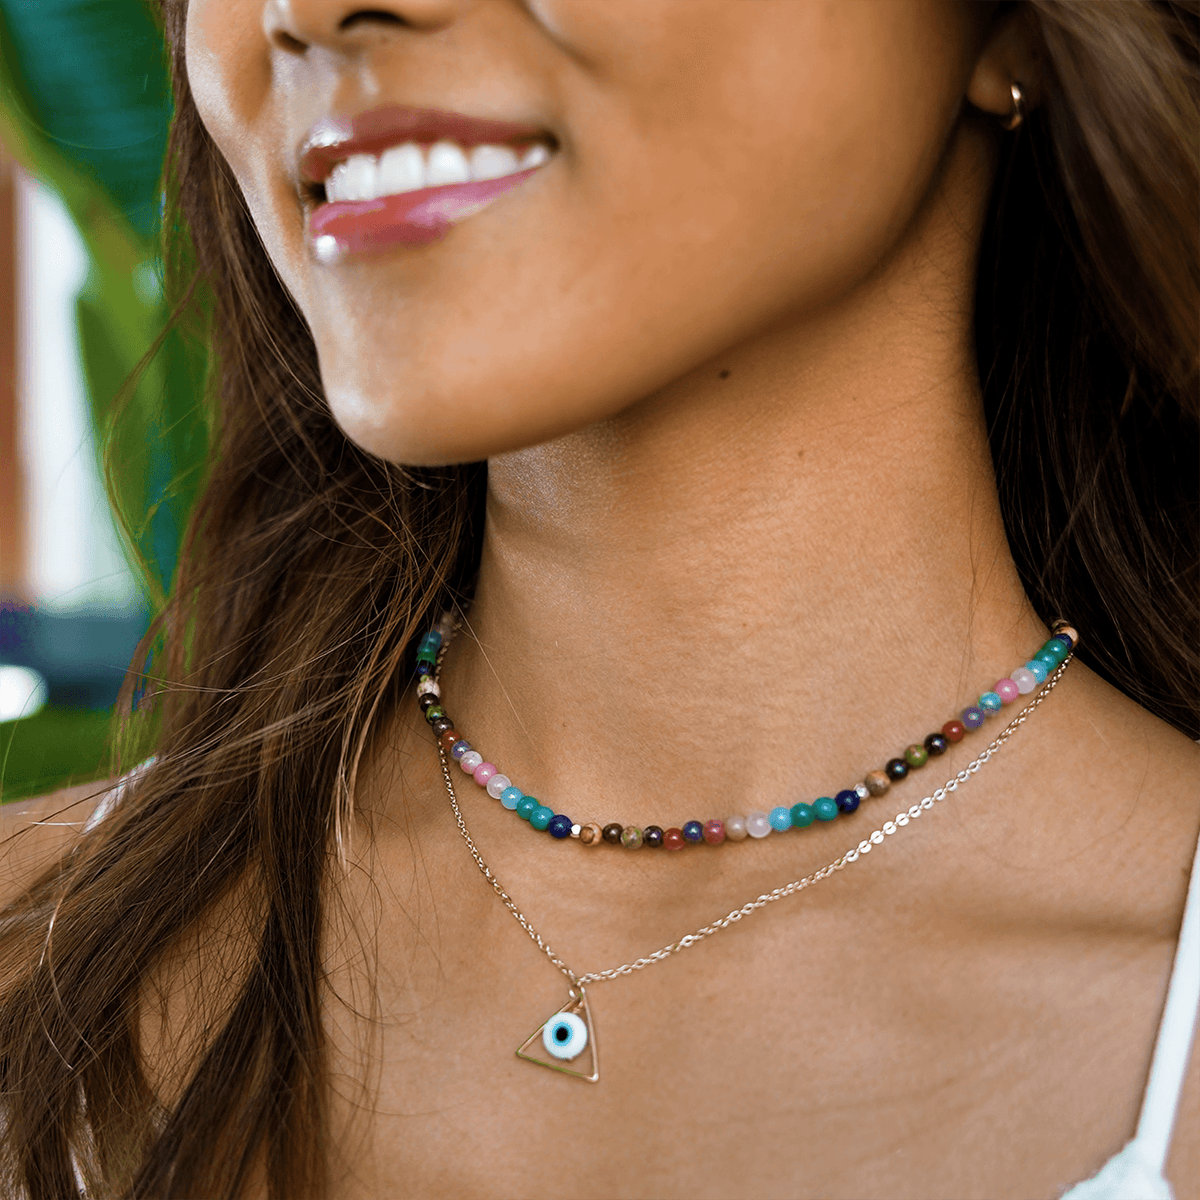 Model wearing a stack of two necklaces. The necklaces include a 4mm multicolor stone healing necklace and a evil eye necklace on a gold chain